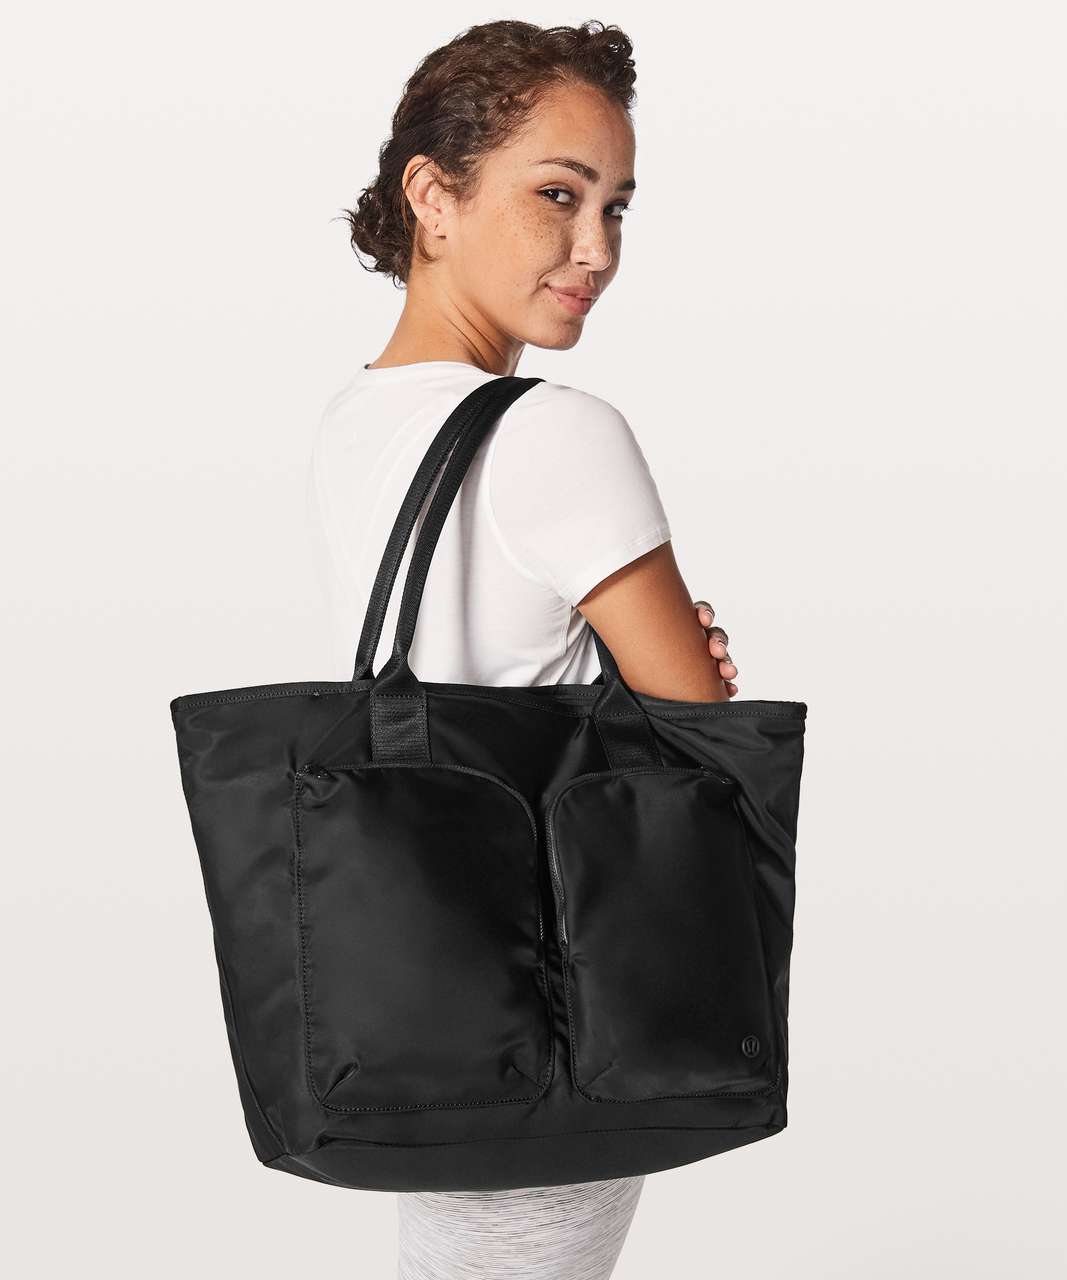 Replying to @katcb1104 heres a quick overview of the city adventurer t, Lululemon Tote Bag